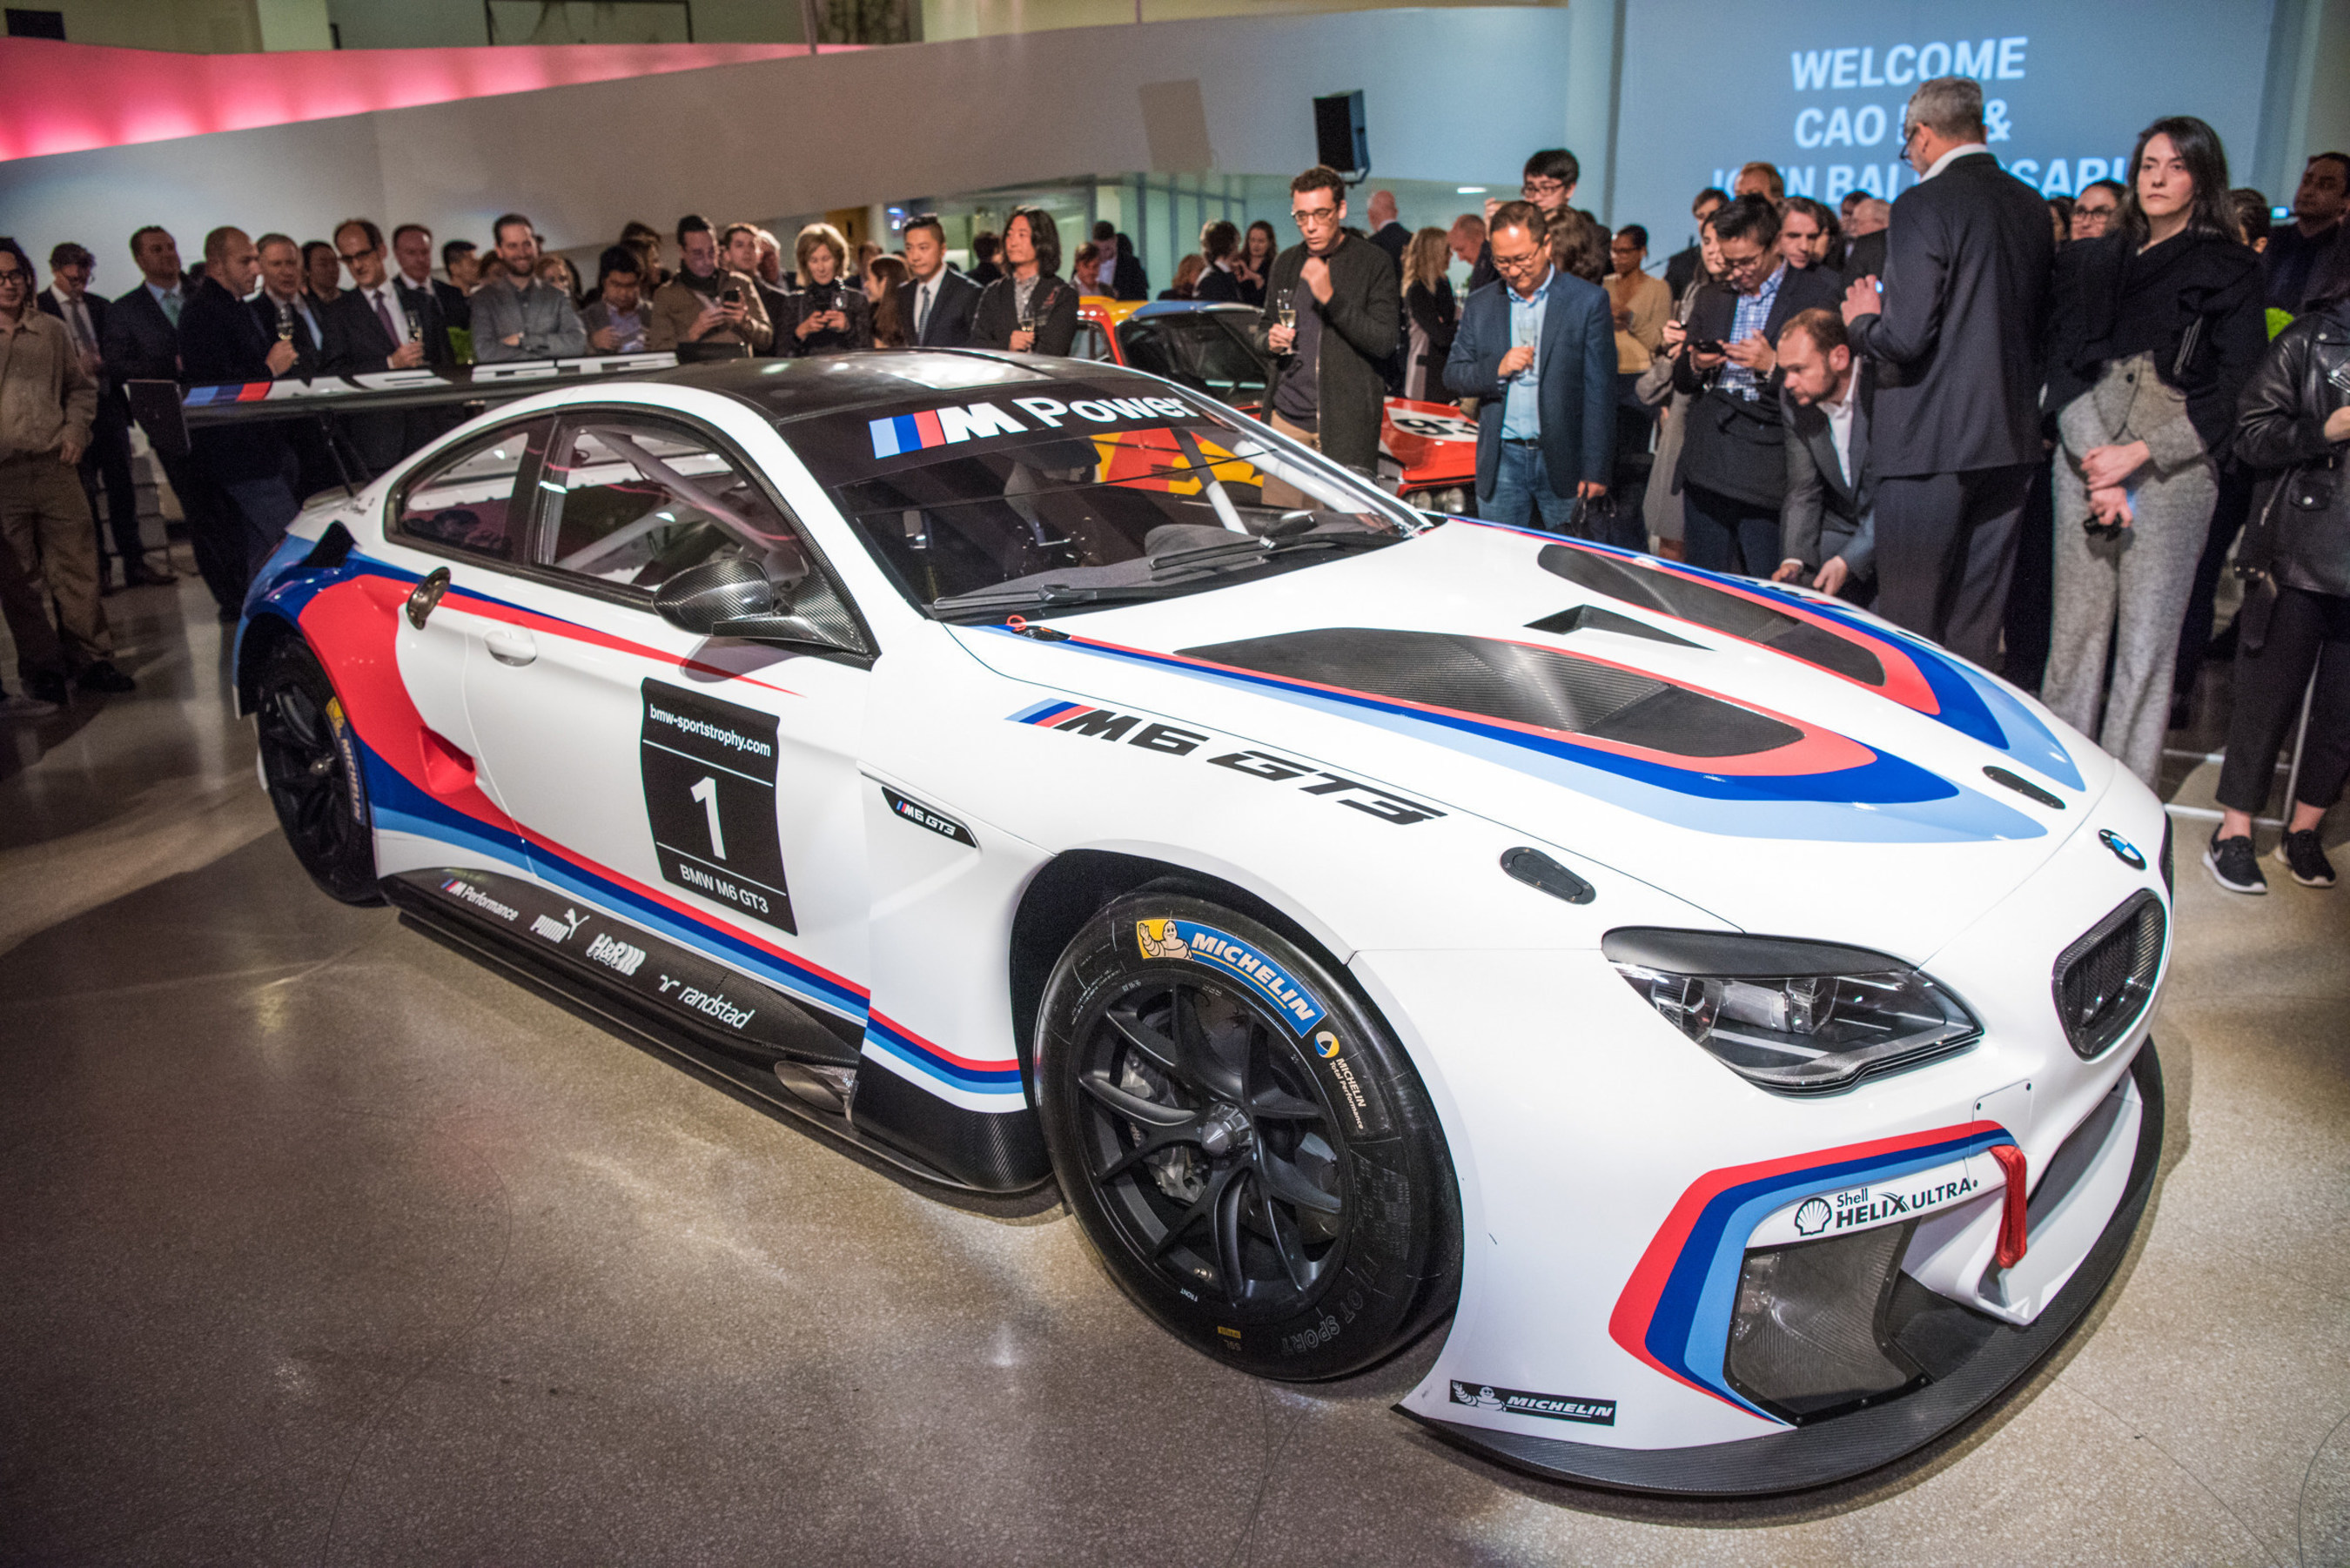 The BMW M6 GT3, the base model for the 18th and 19th BMW Art Car, at the announcement event for the new BMW Art Car artists Cao Fei and John Baldessari at the Guggenheim Museum, New York. (11/2015) (C) BMW AG (PRNewsFoto/BMW Group) (PRNewsFoto/BMW Group)